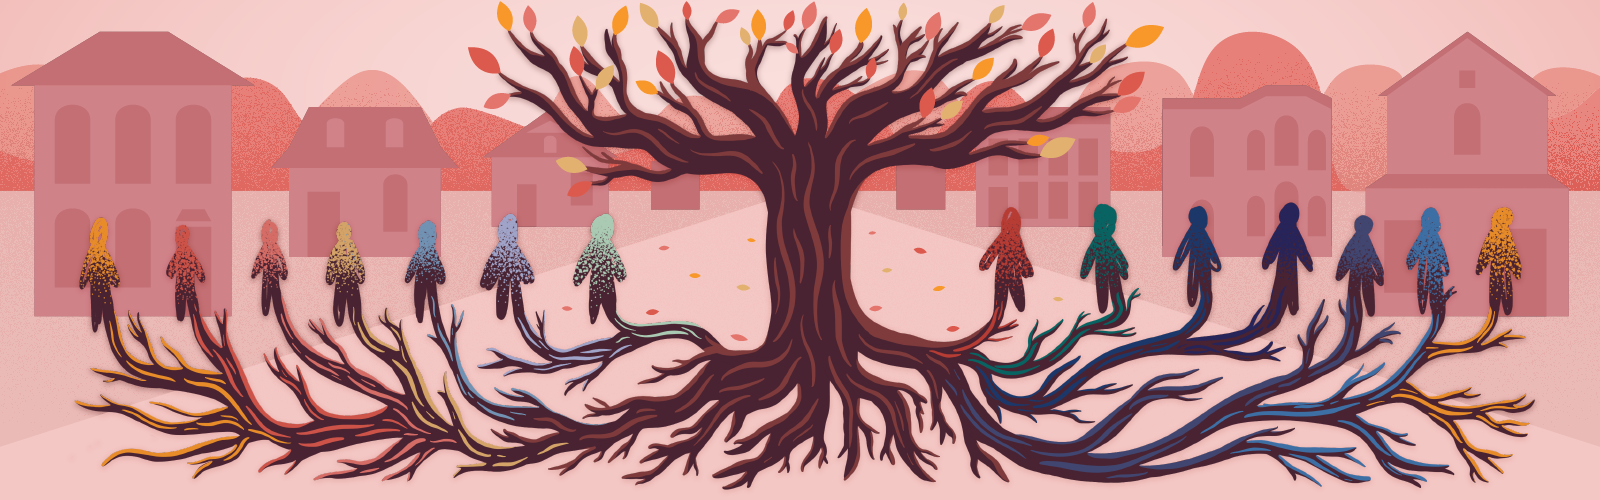 Graphic of people connected to tree roots in Ninth Street Historic Park